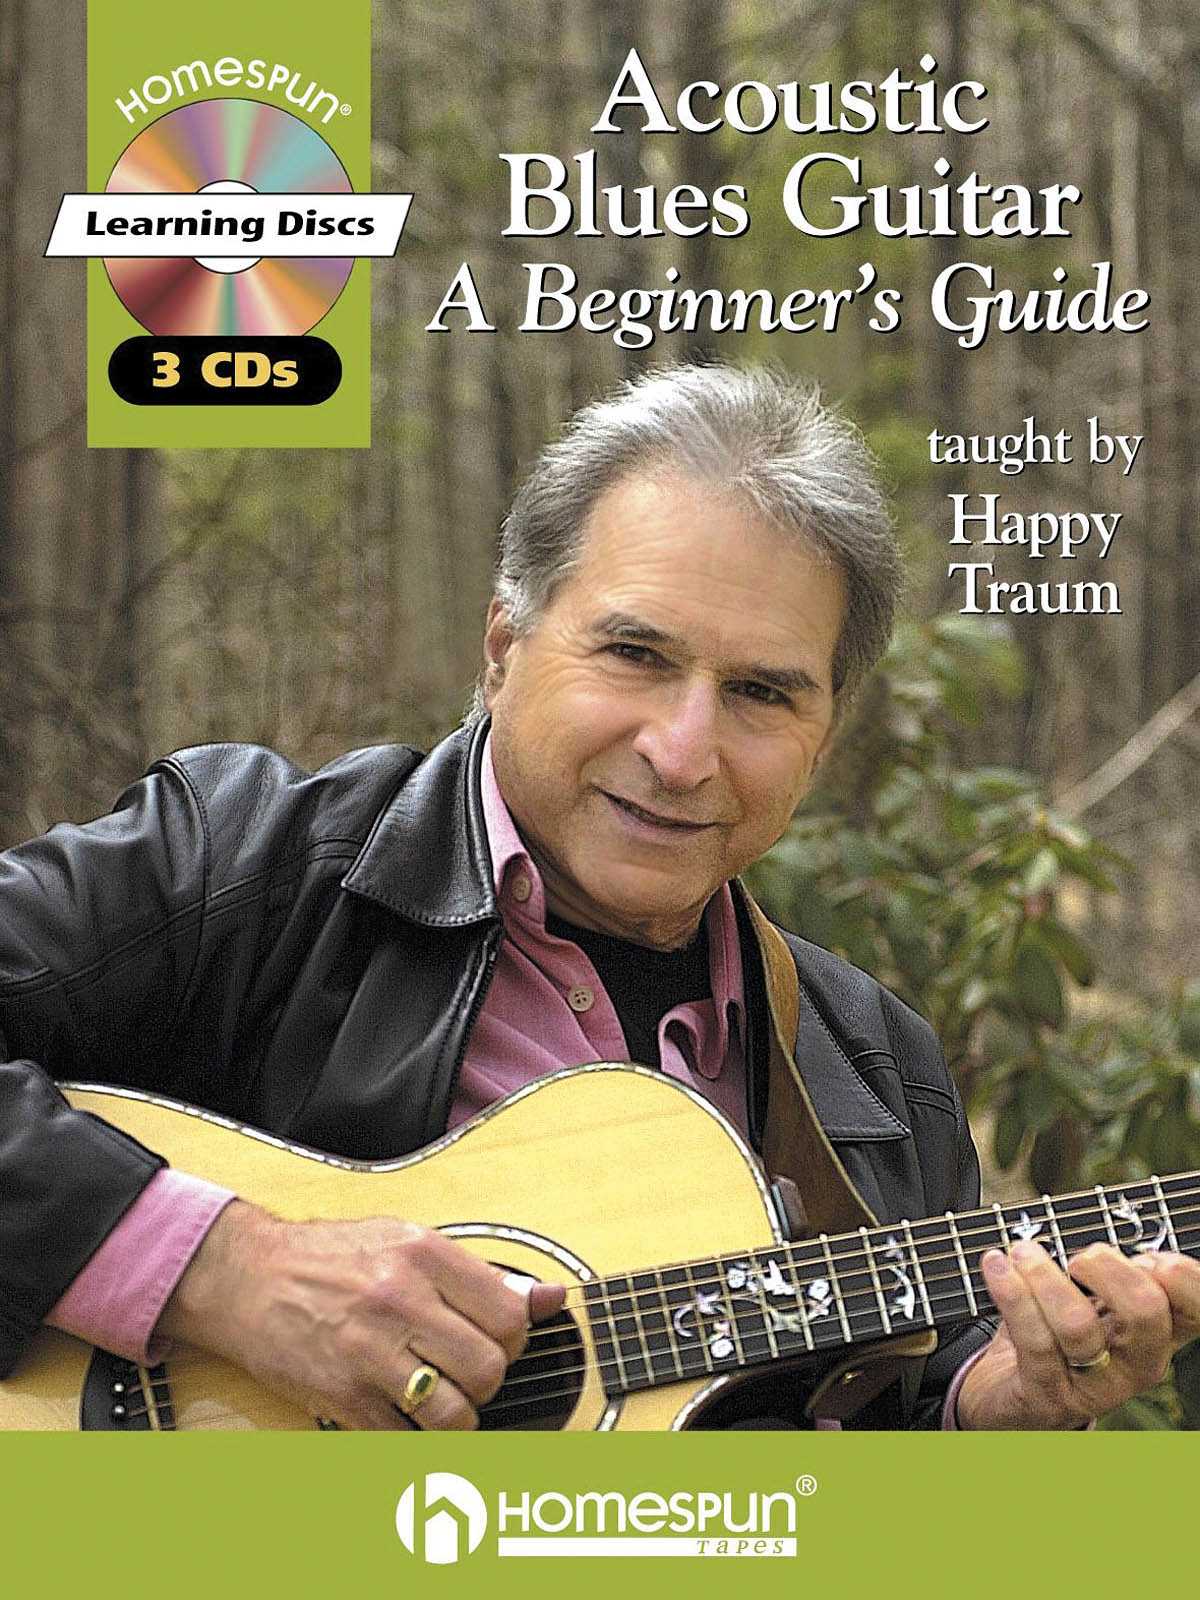 Image 1 of Acoustic Blues Guitar-A Beginner's Guide - SKU# 300-585 : Product Type Media : Elderly Instruments